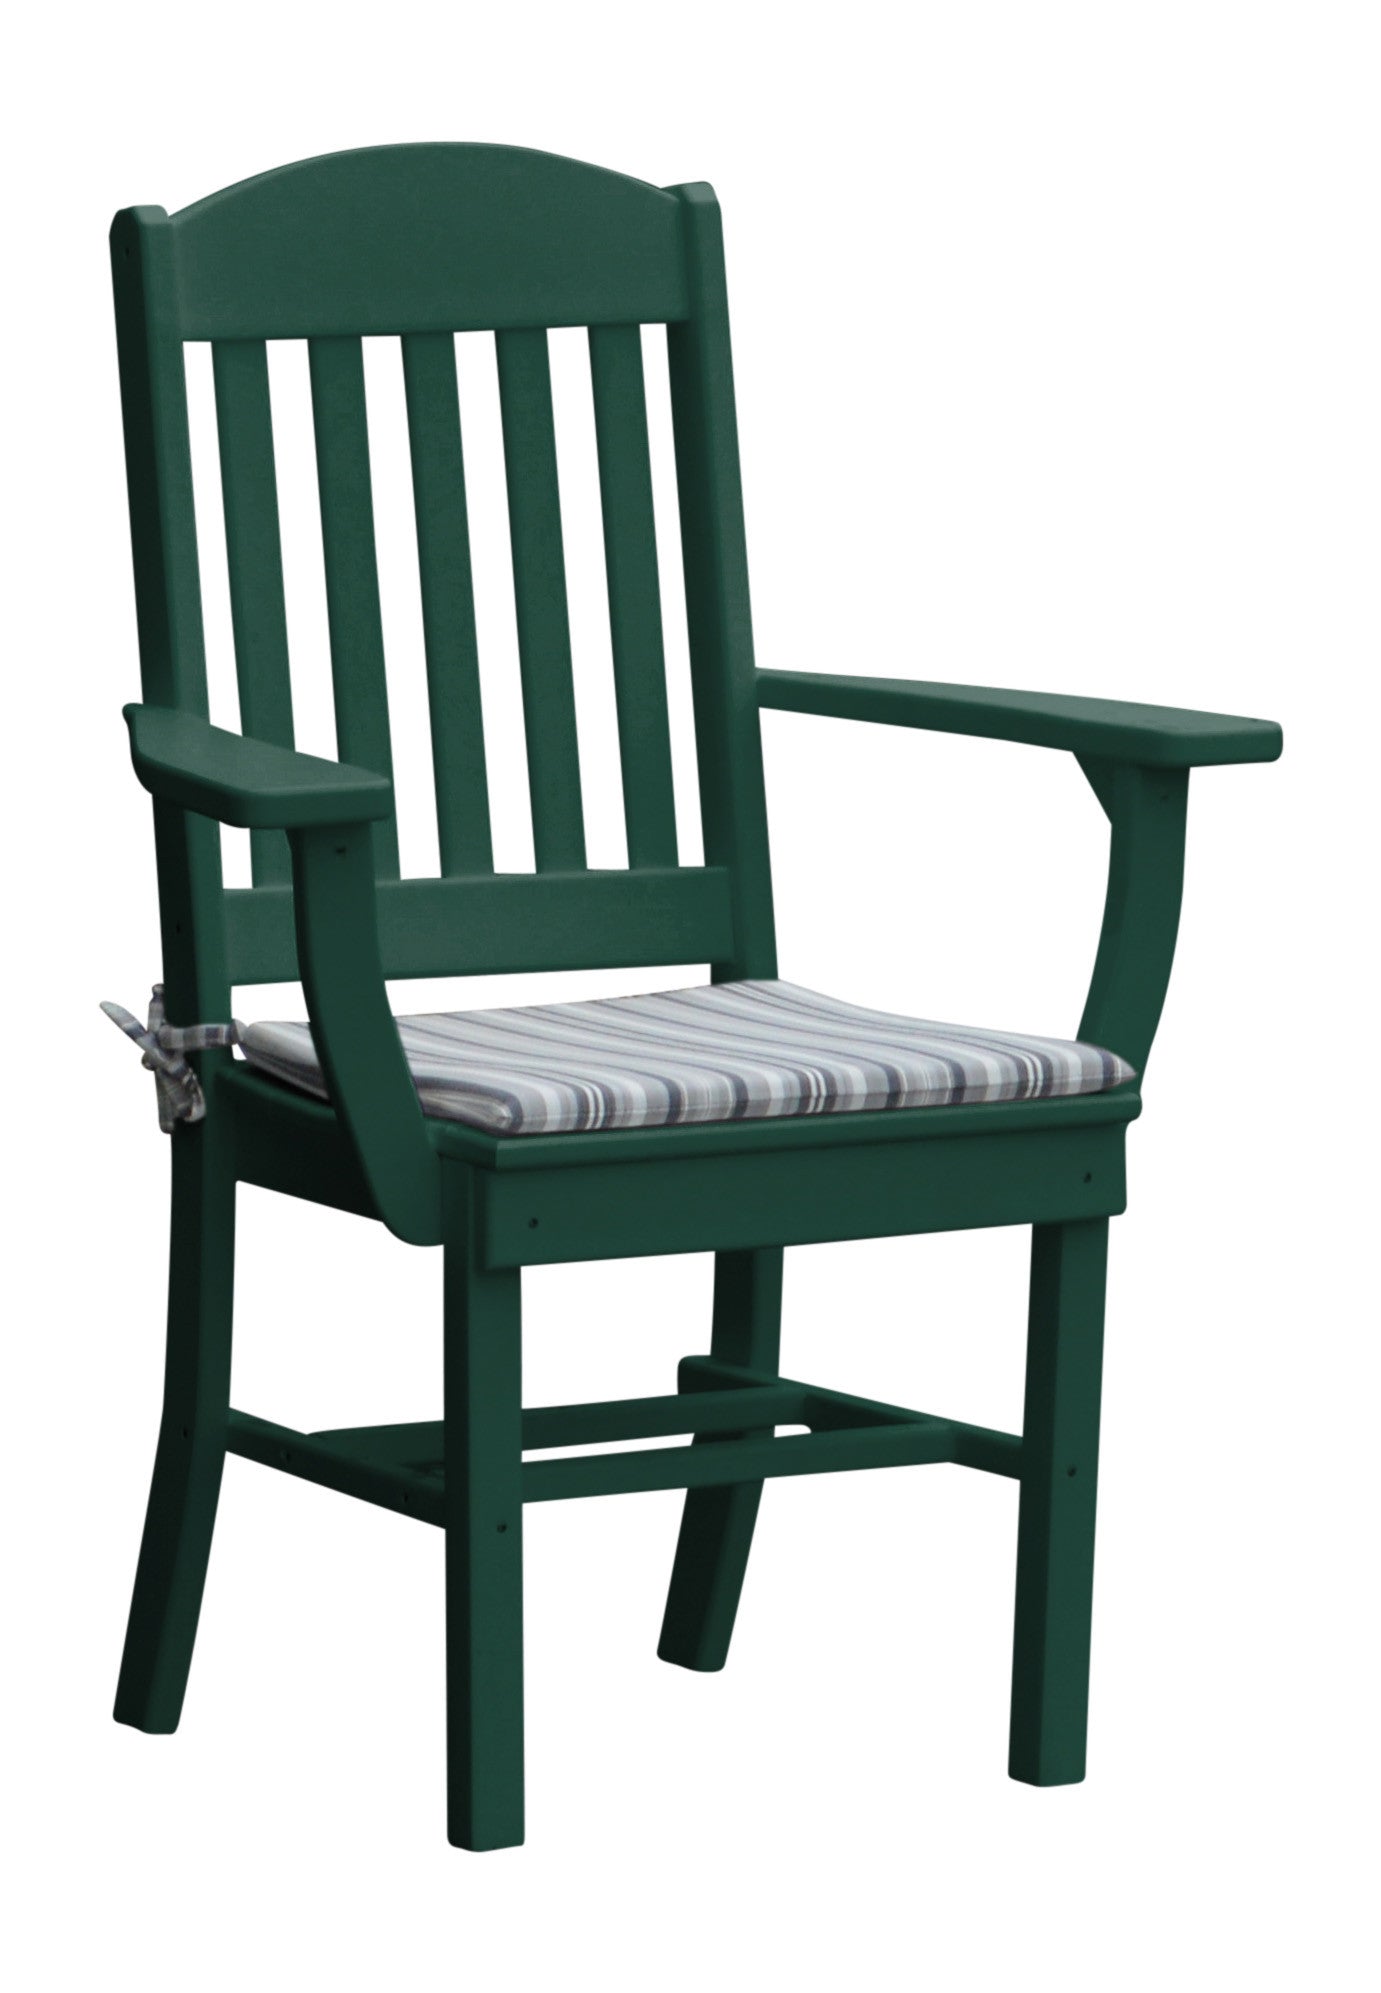 A&L Furniture Company Recycled Plastic Classic Dining Chair w/ Arms - Turf Green